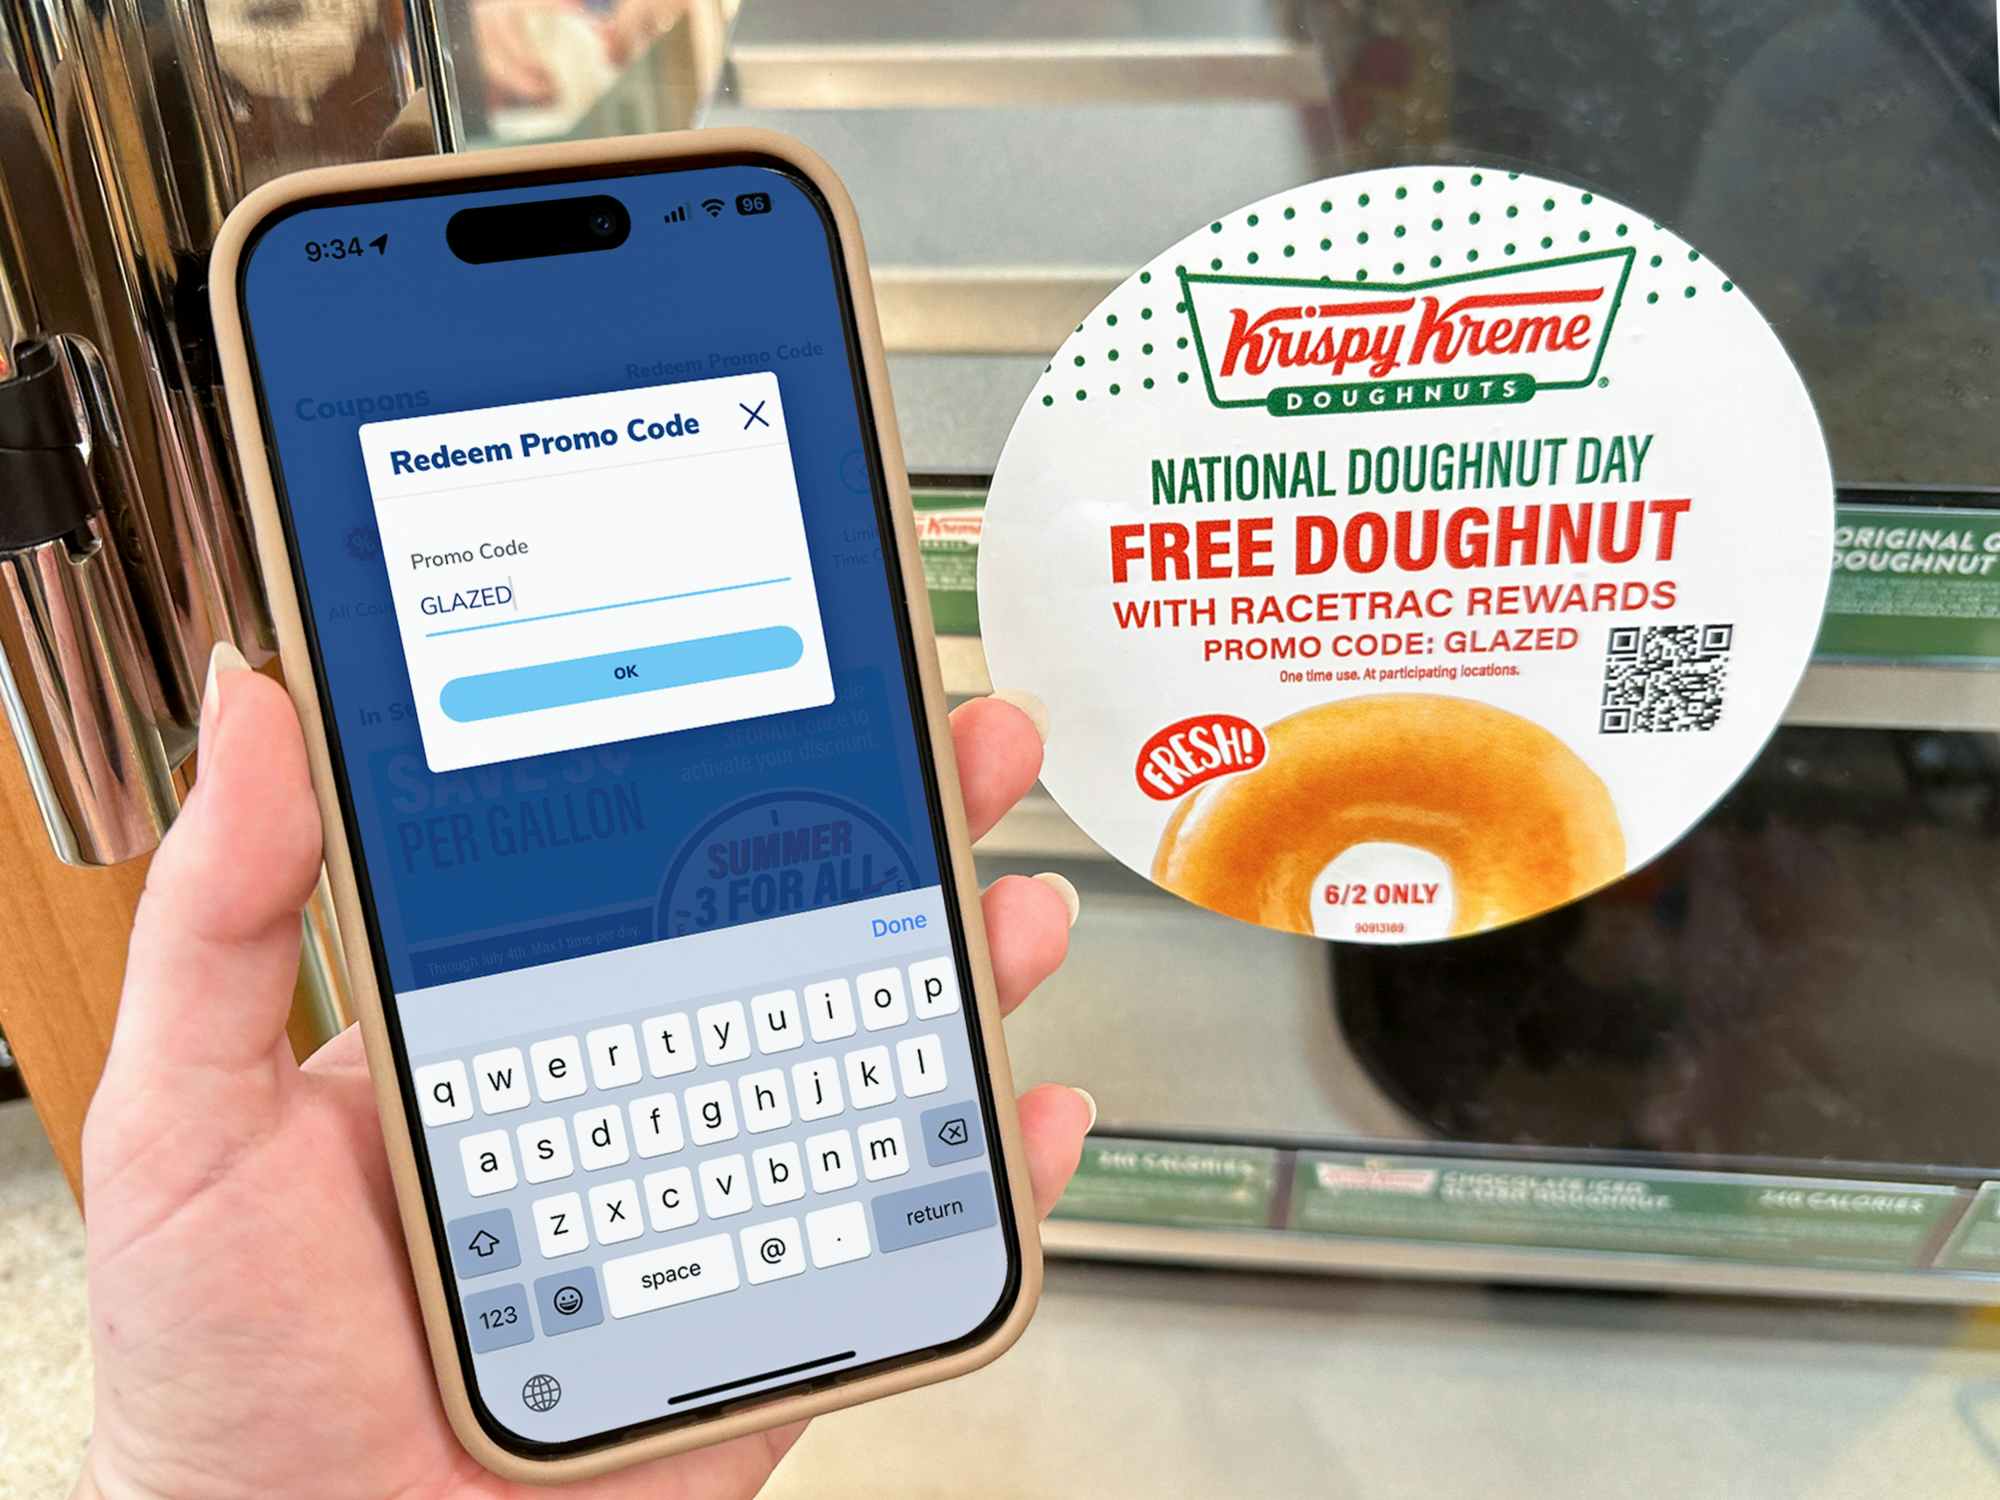 Someone holding a phone next to the RaceTrac Krispy Kreme donut display with a sign advertising the National Doughnut Day offer with ...